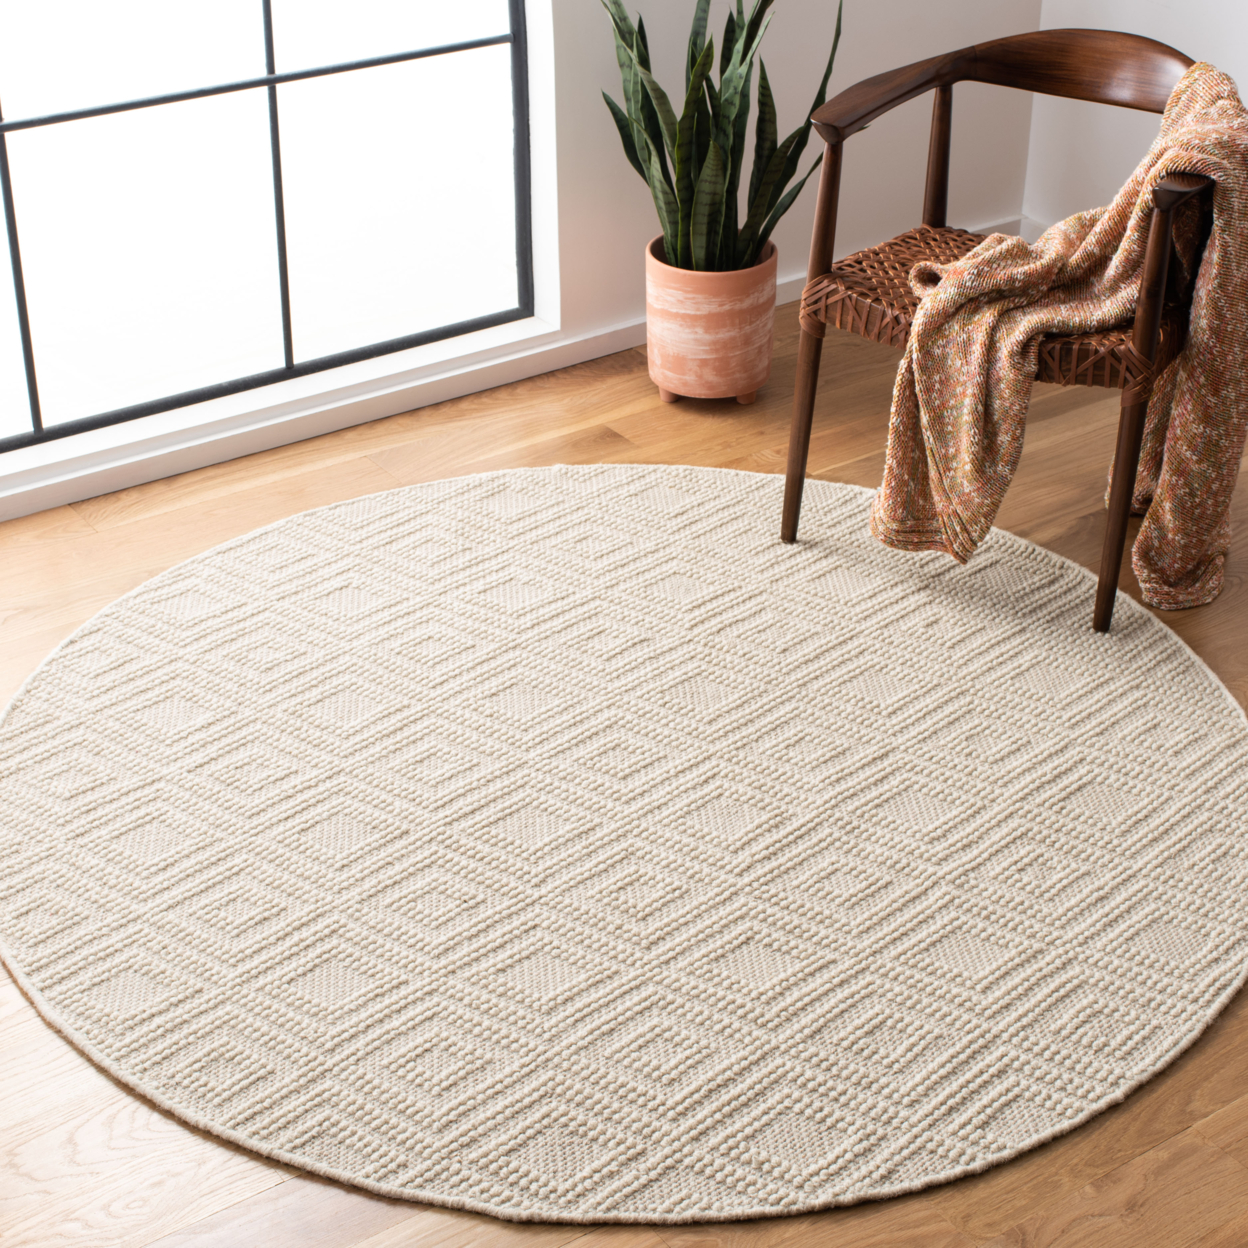 SAFAVIEH Vermont Collection VRM212A Handwoven Ivory Rug - 2-3 X 10